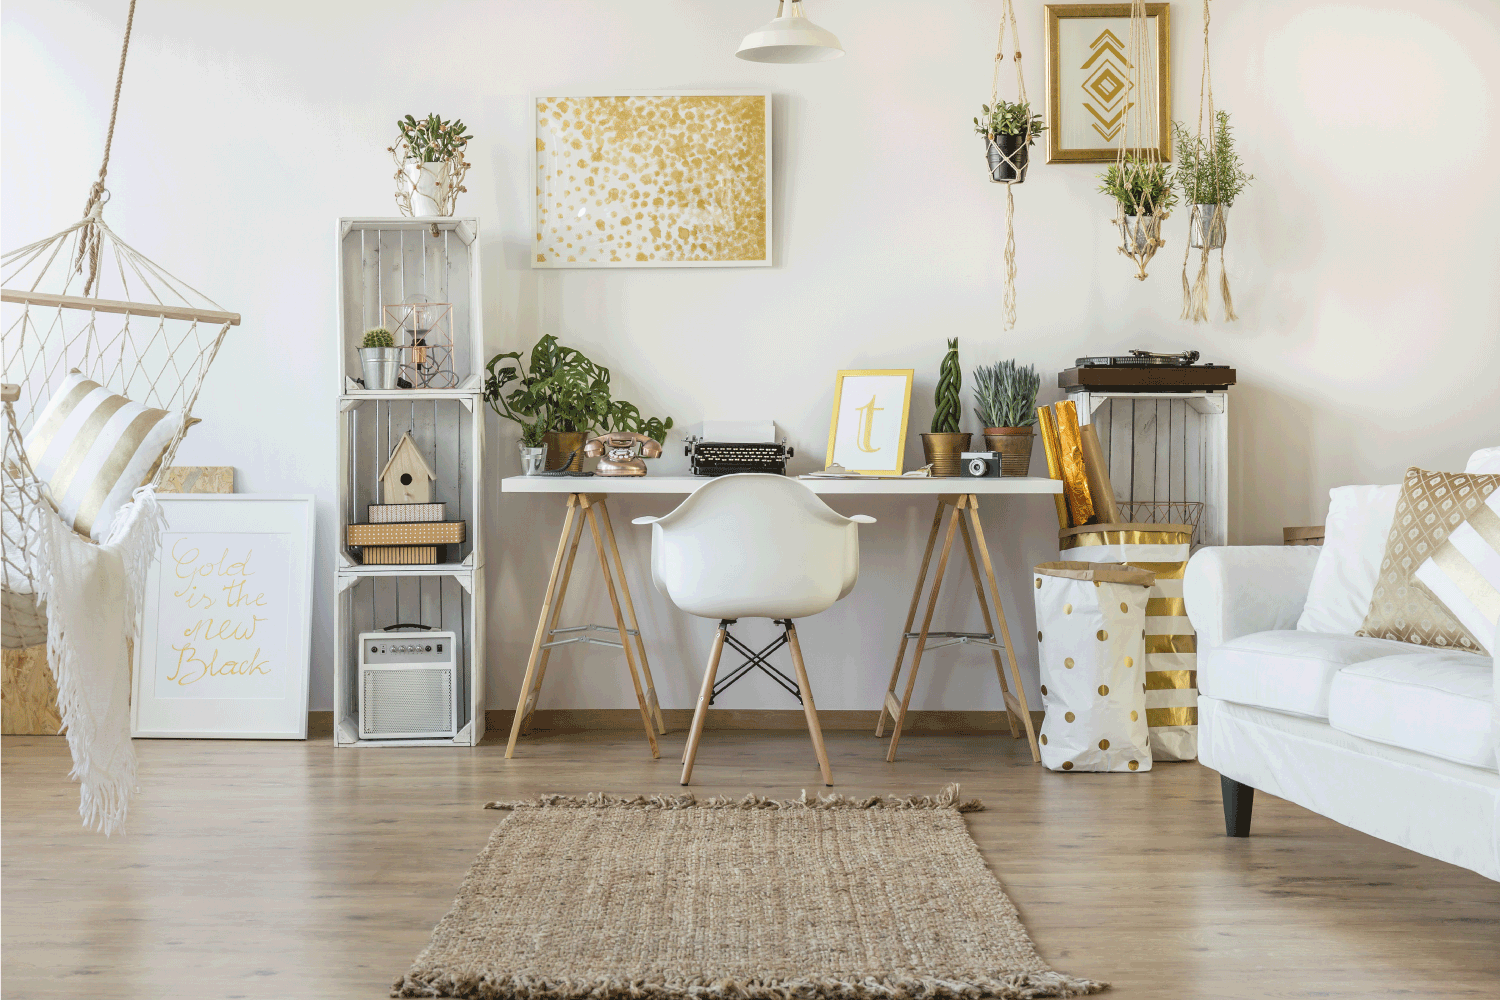 Multifunctional loft apartment with home office area, gold accents